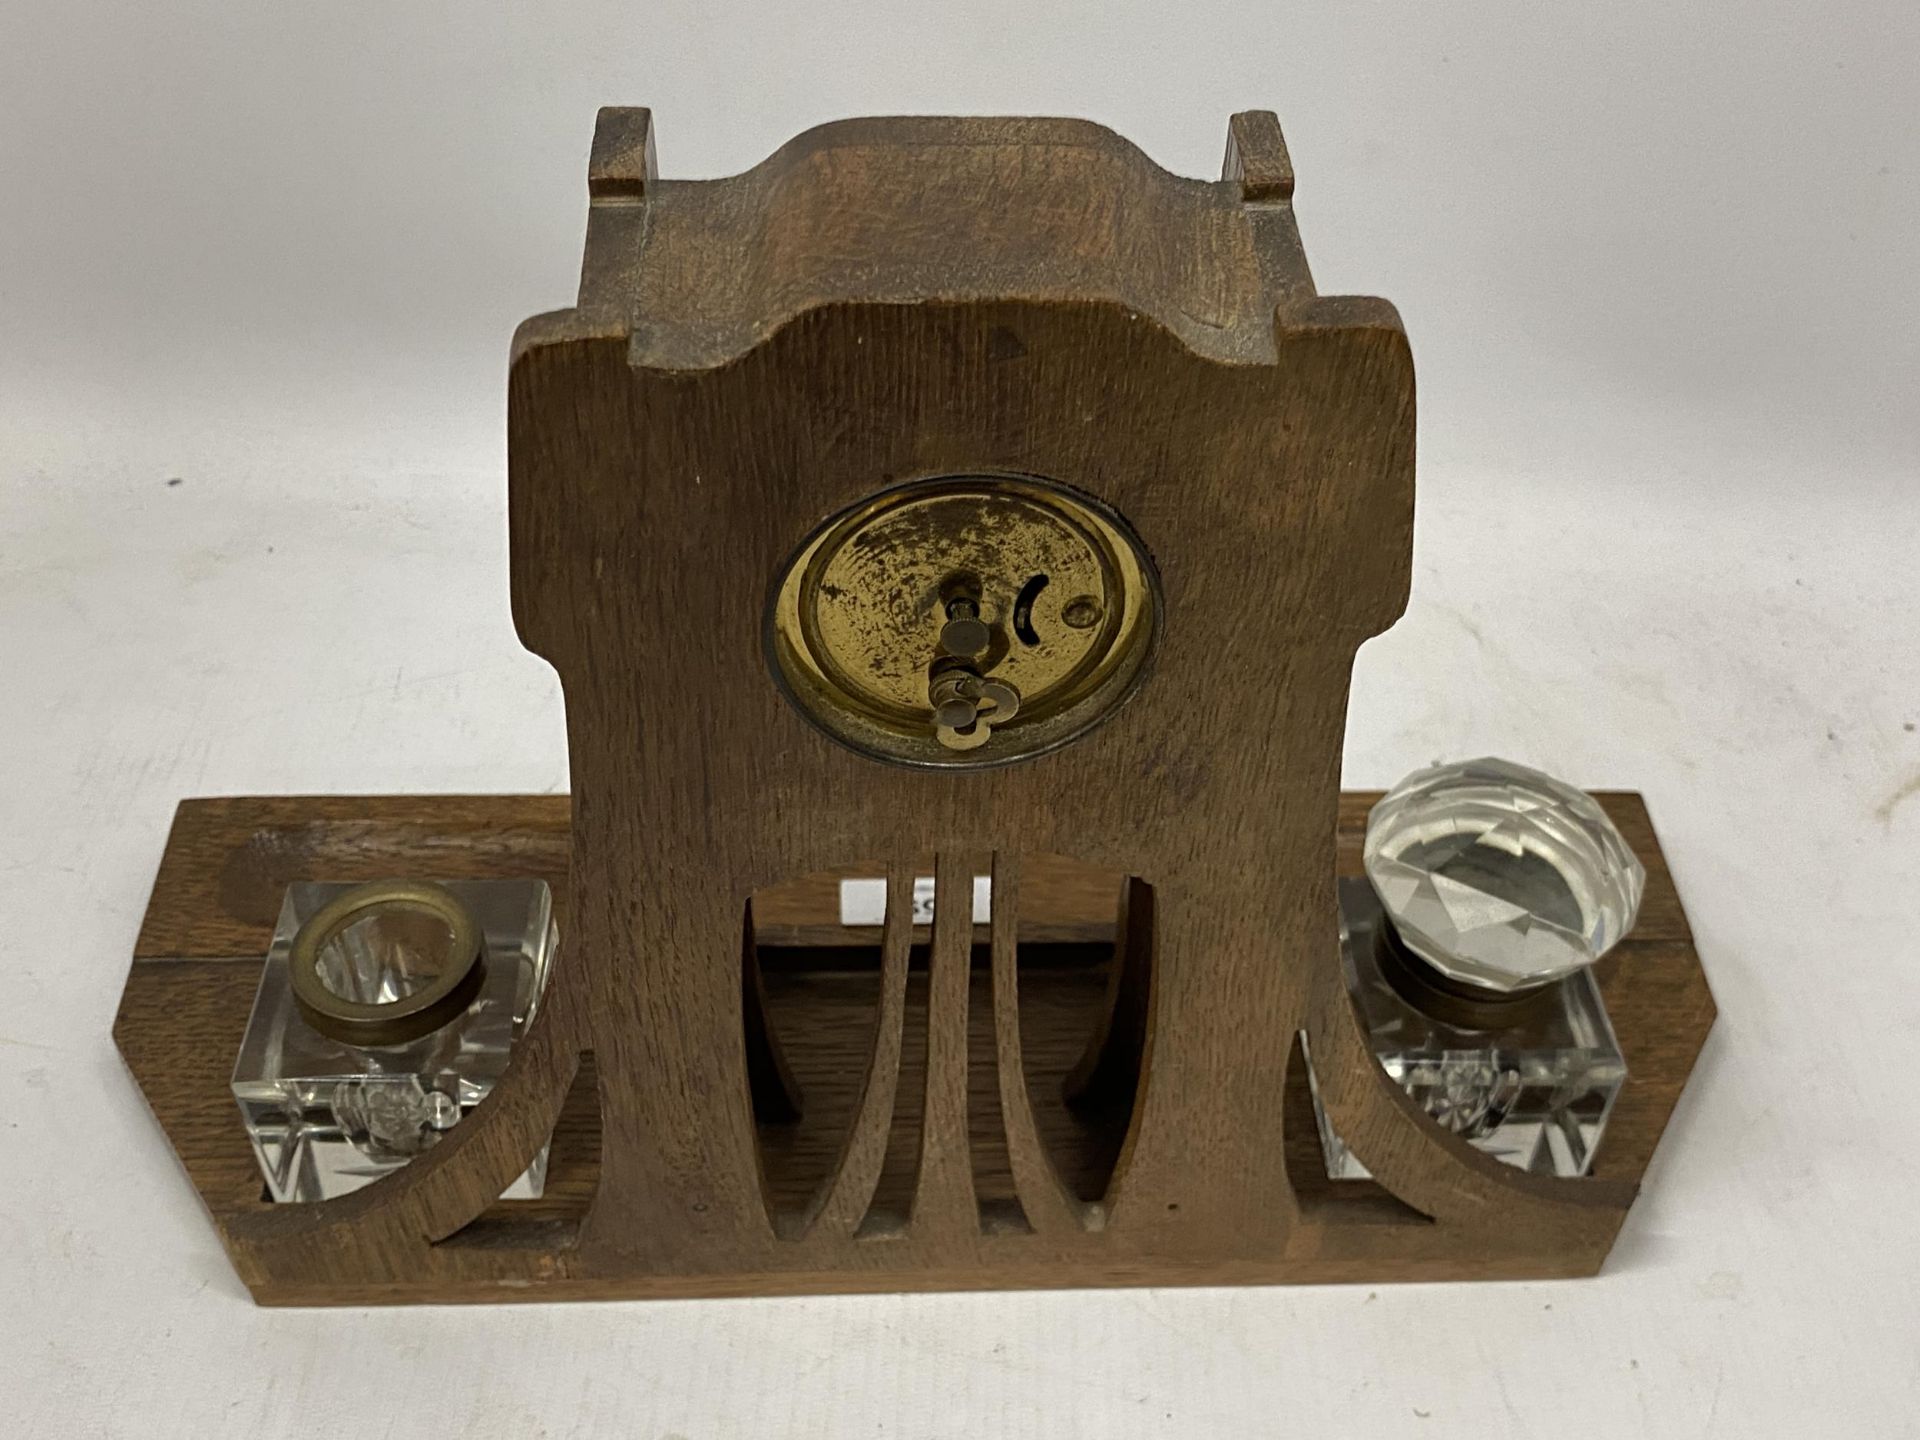 AN ARTS AND CRAFTS WOODEN CLOCK WITH INSET INKWELLS - Image 3 of 3